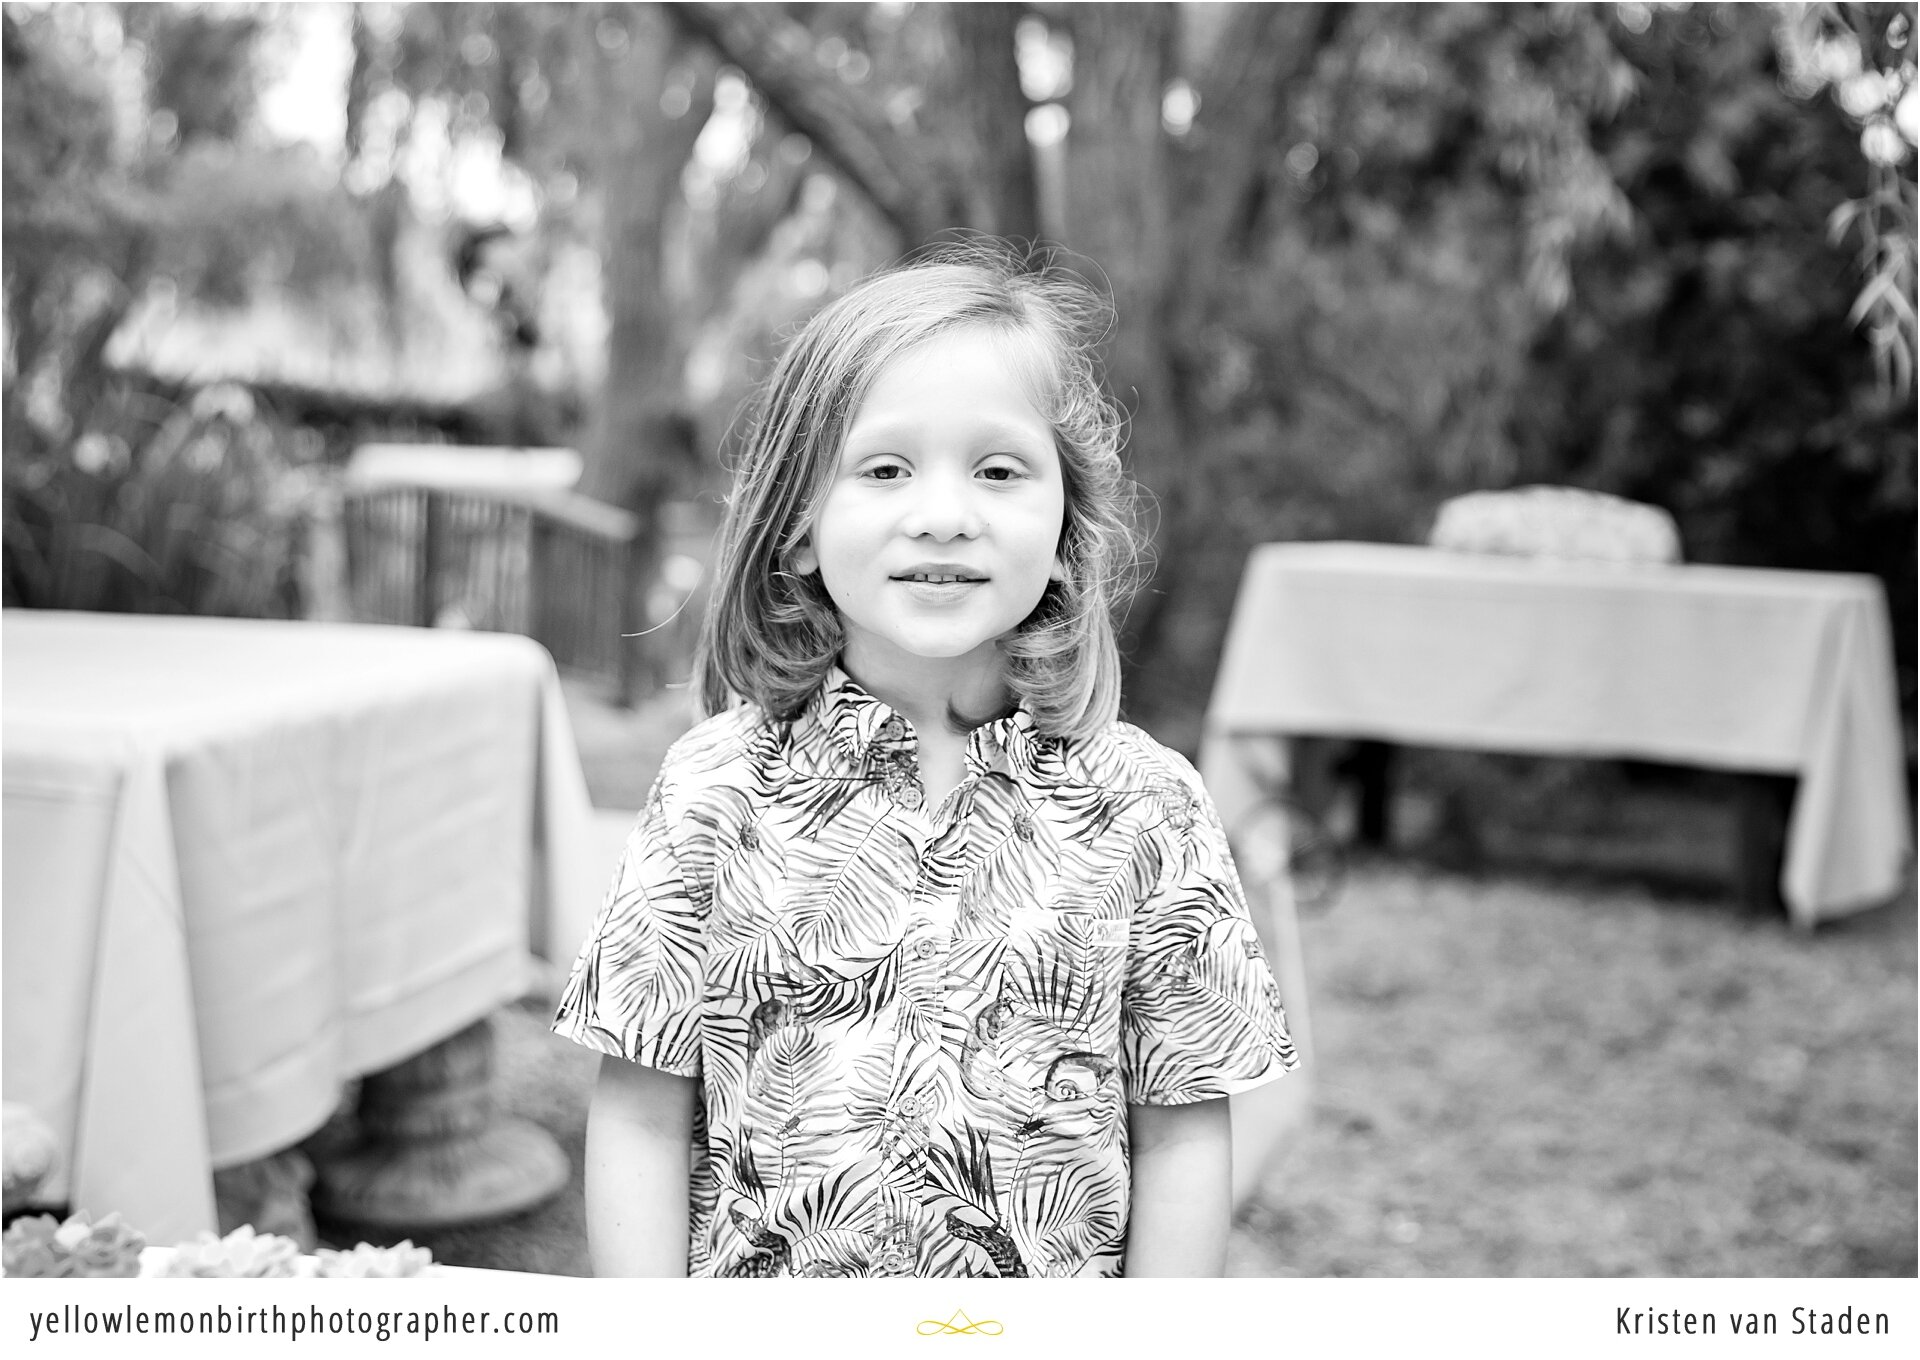 special events birthday party photographer cape town_0006.jpg